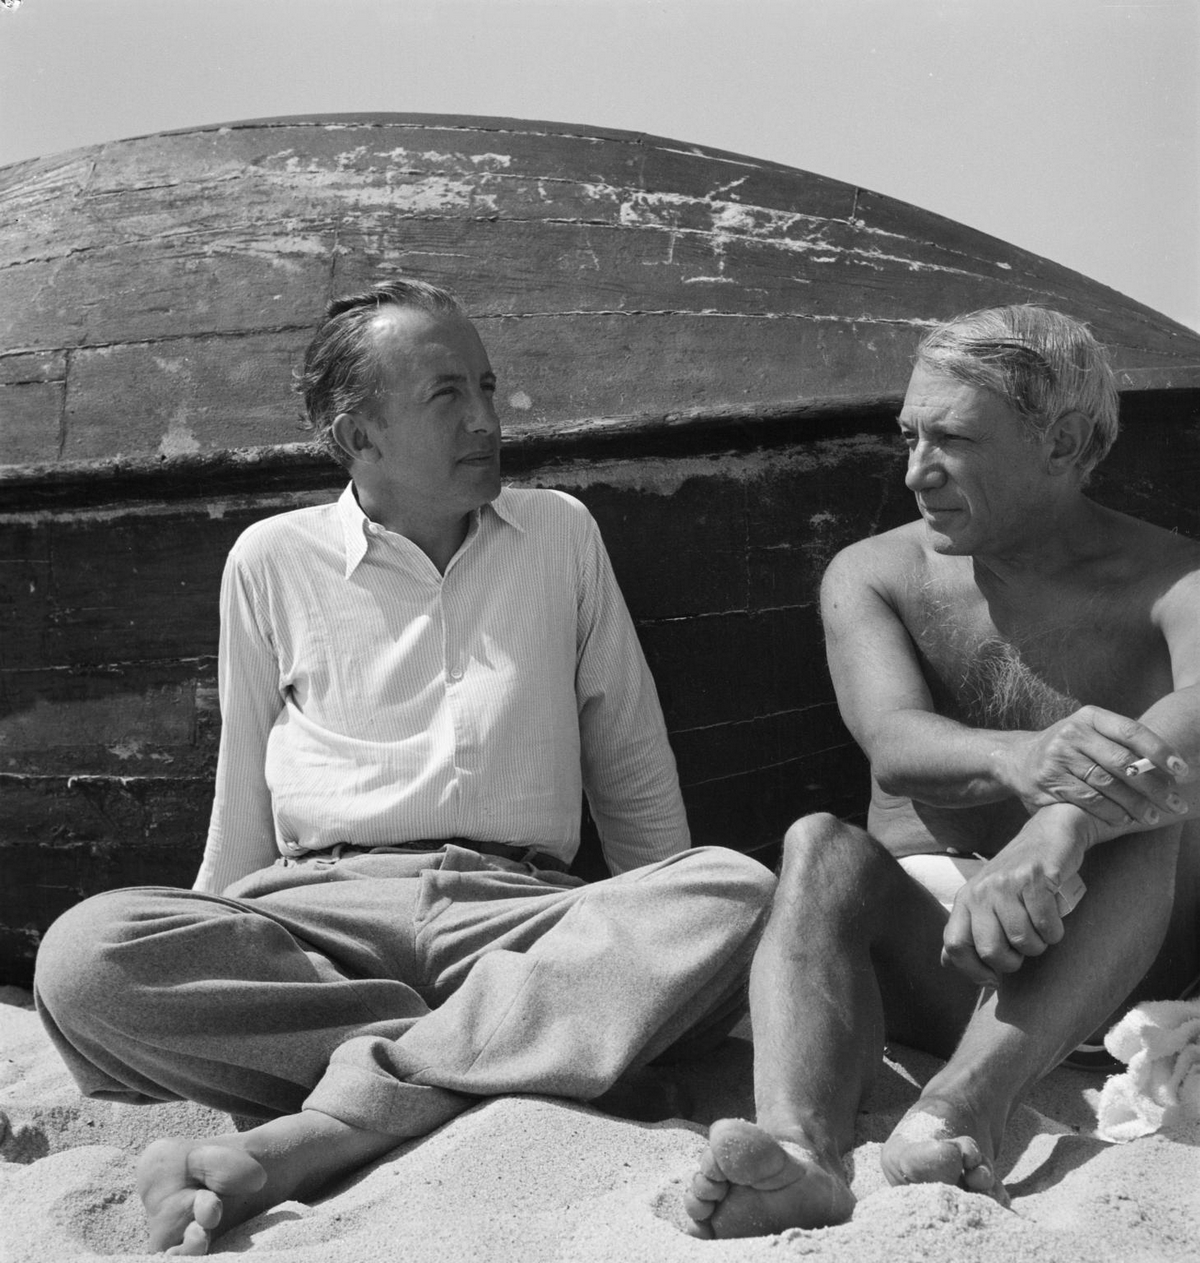 Photograph of Paul Eluard and Pablo Picasso on the beach Sep 1937 Eileen Agar 1899-1991 Presented to Tate Archive by Eileen Agar in 1989 and transferred from the photograph collection in 2012.